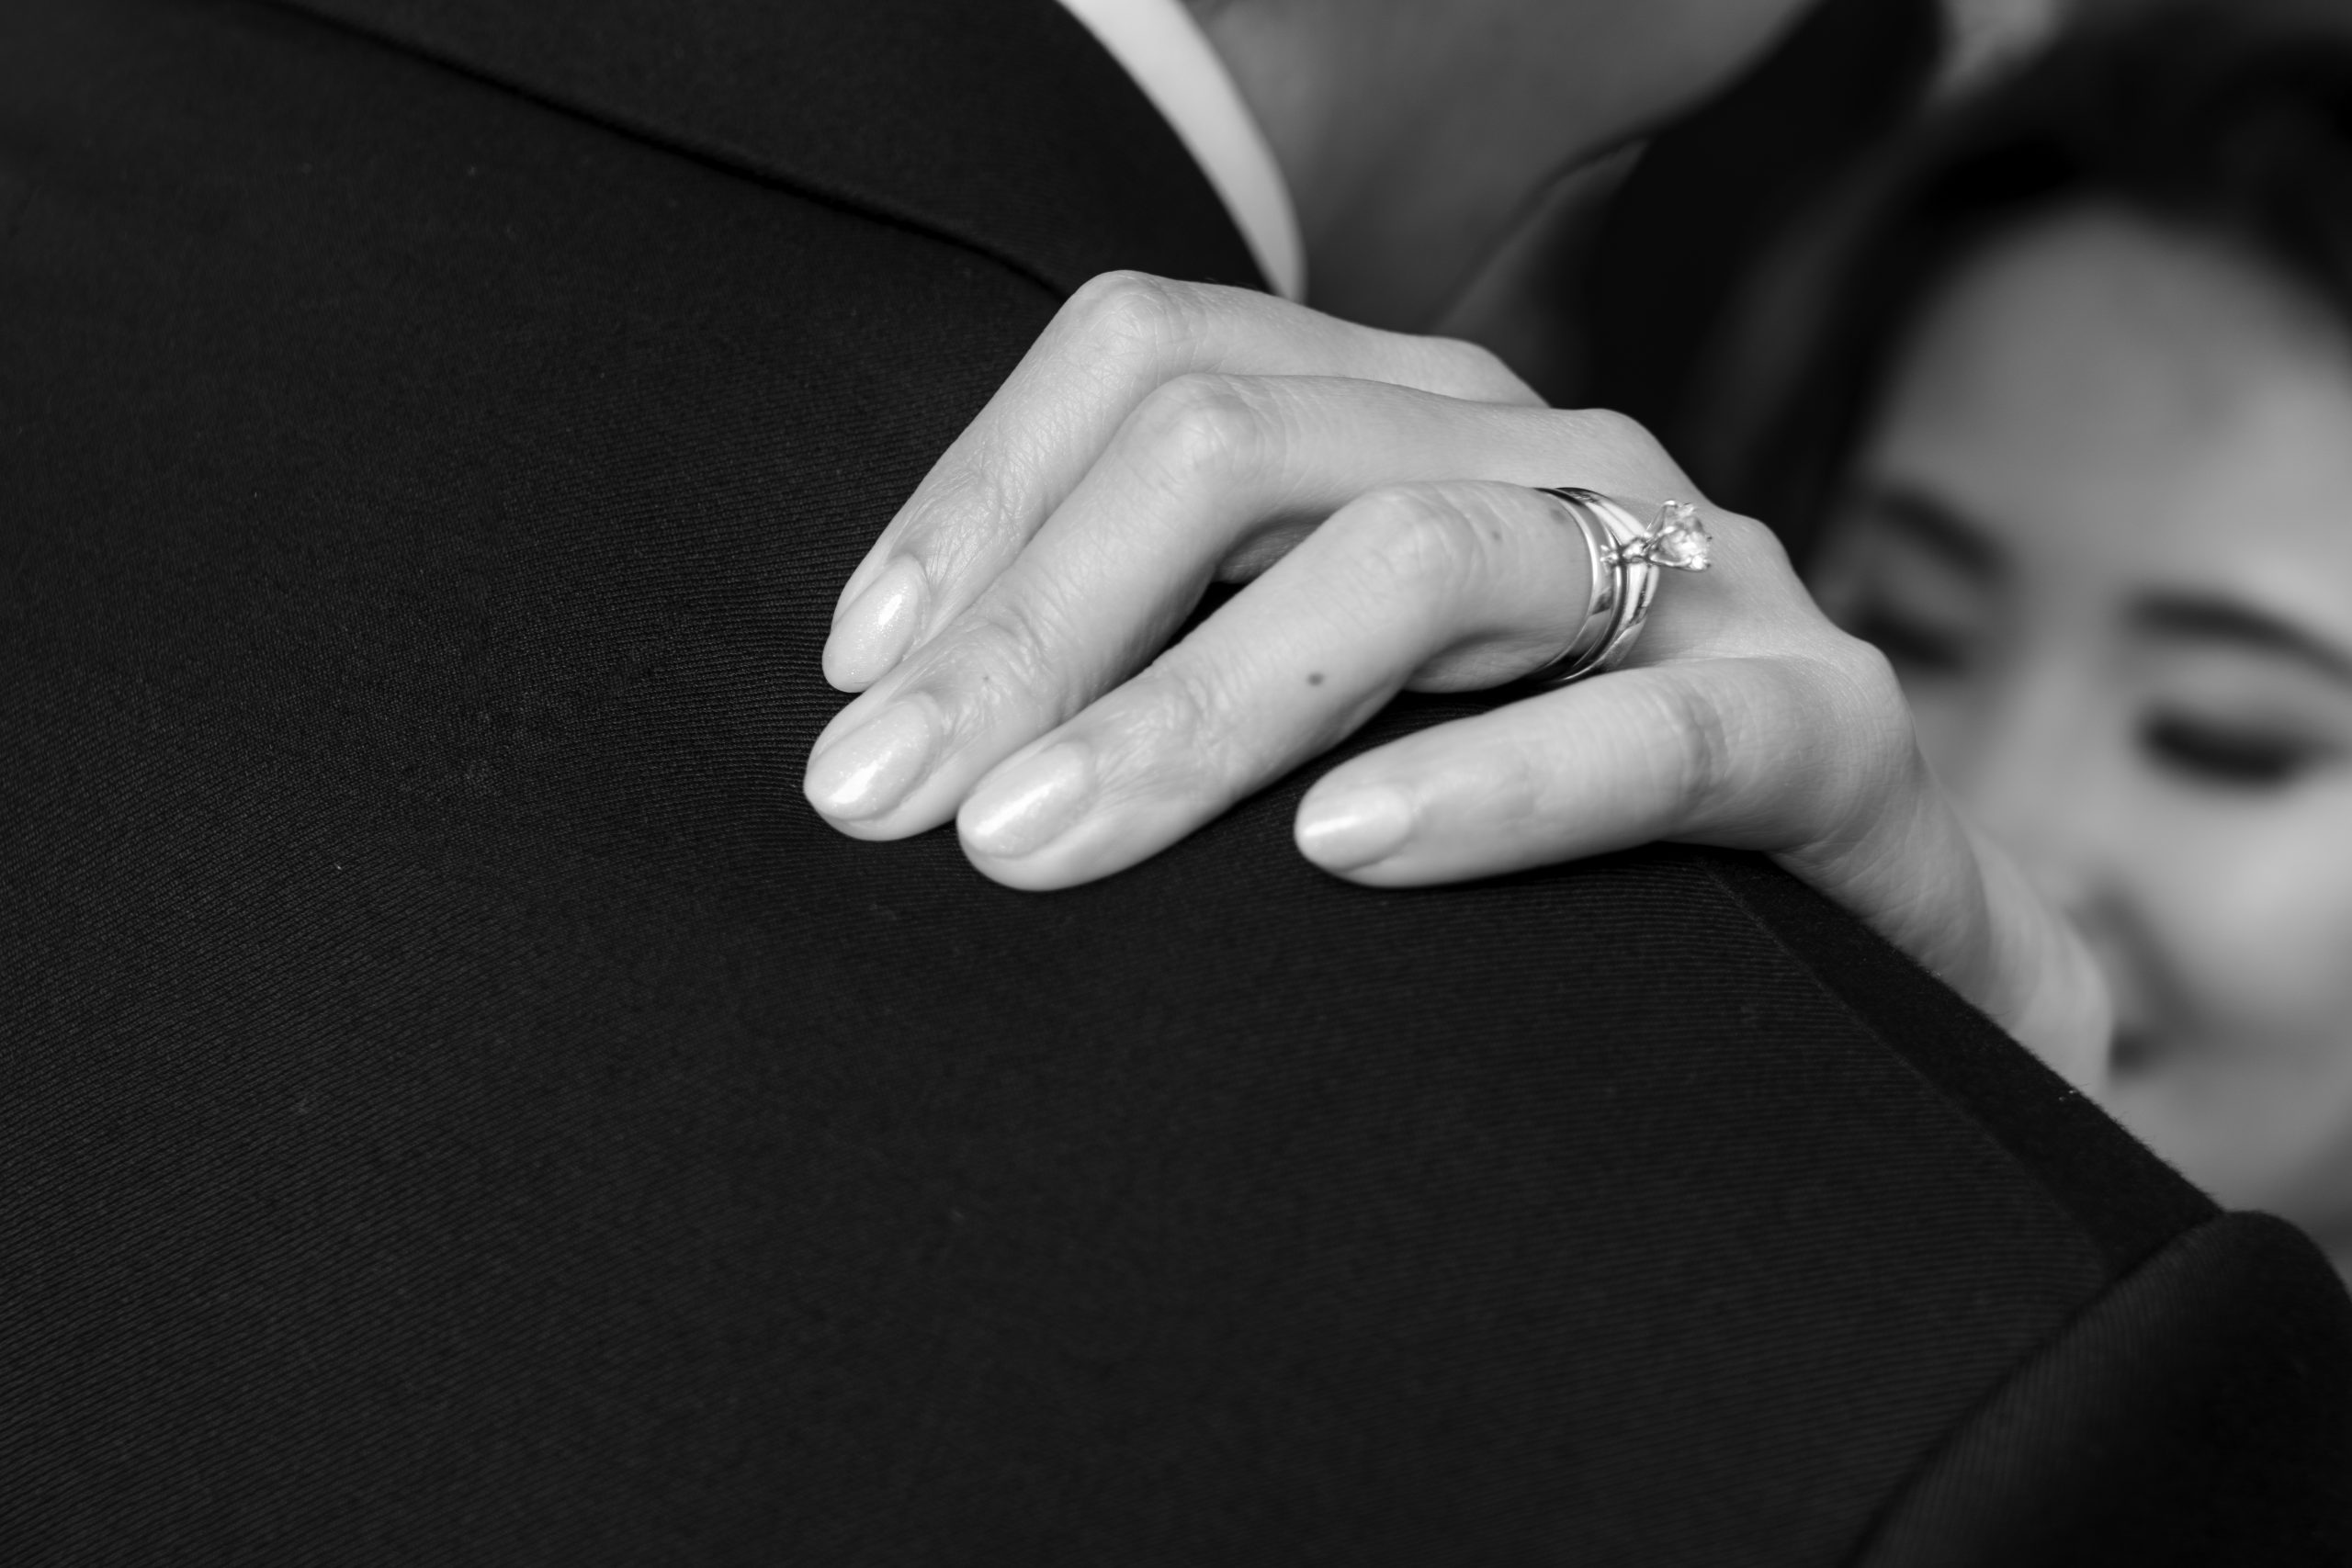 a close up of a person wearing a wedding ring